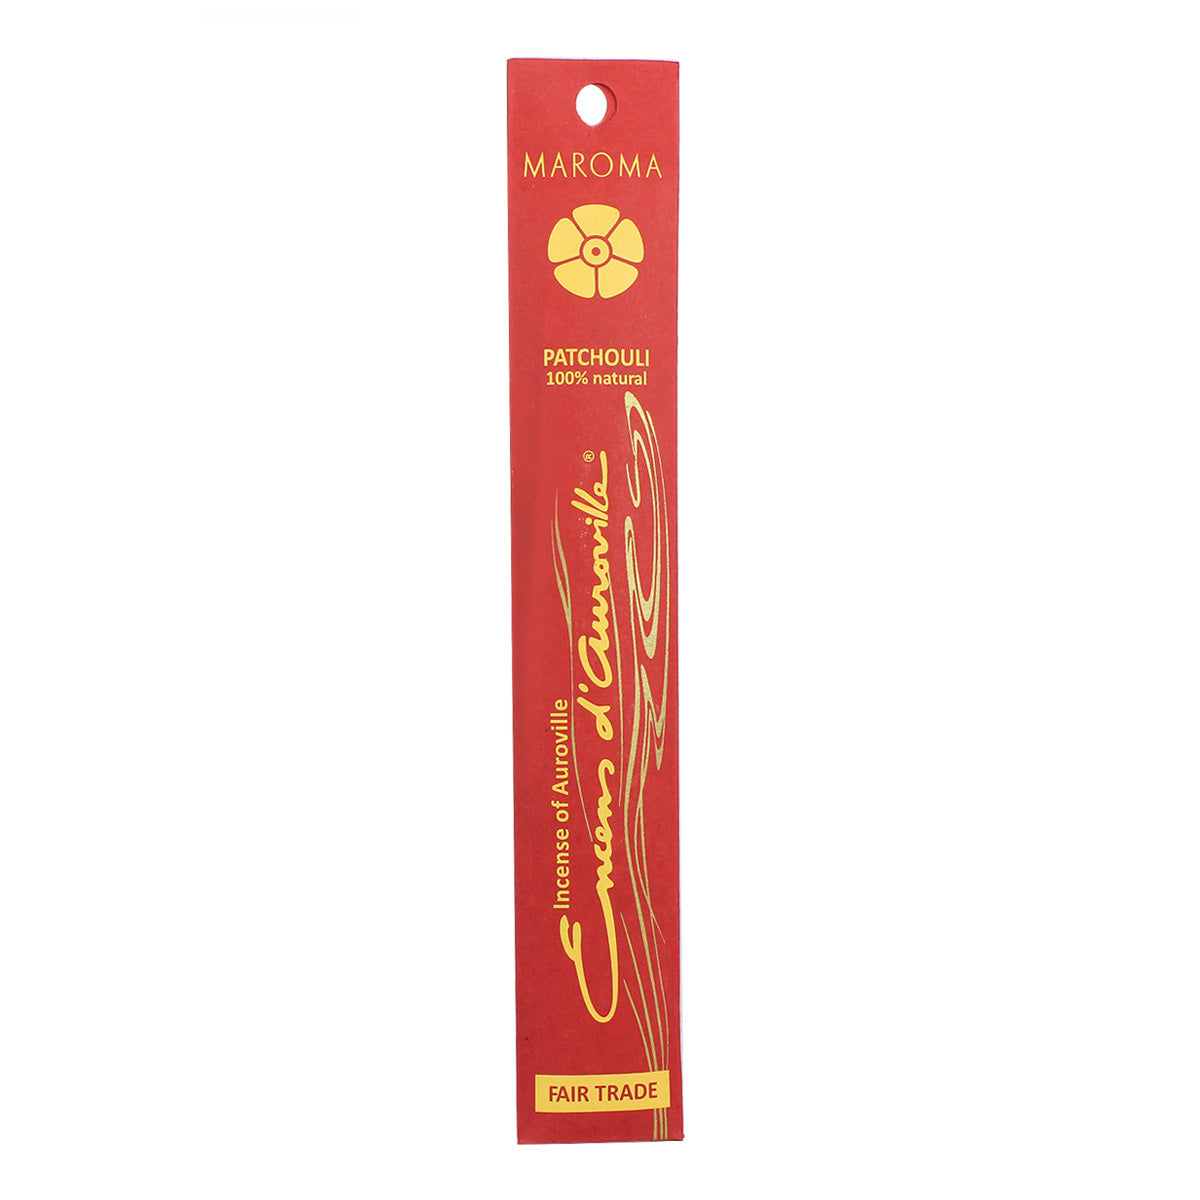 Primary image of Patchouli Incense